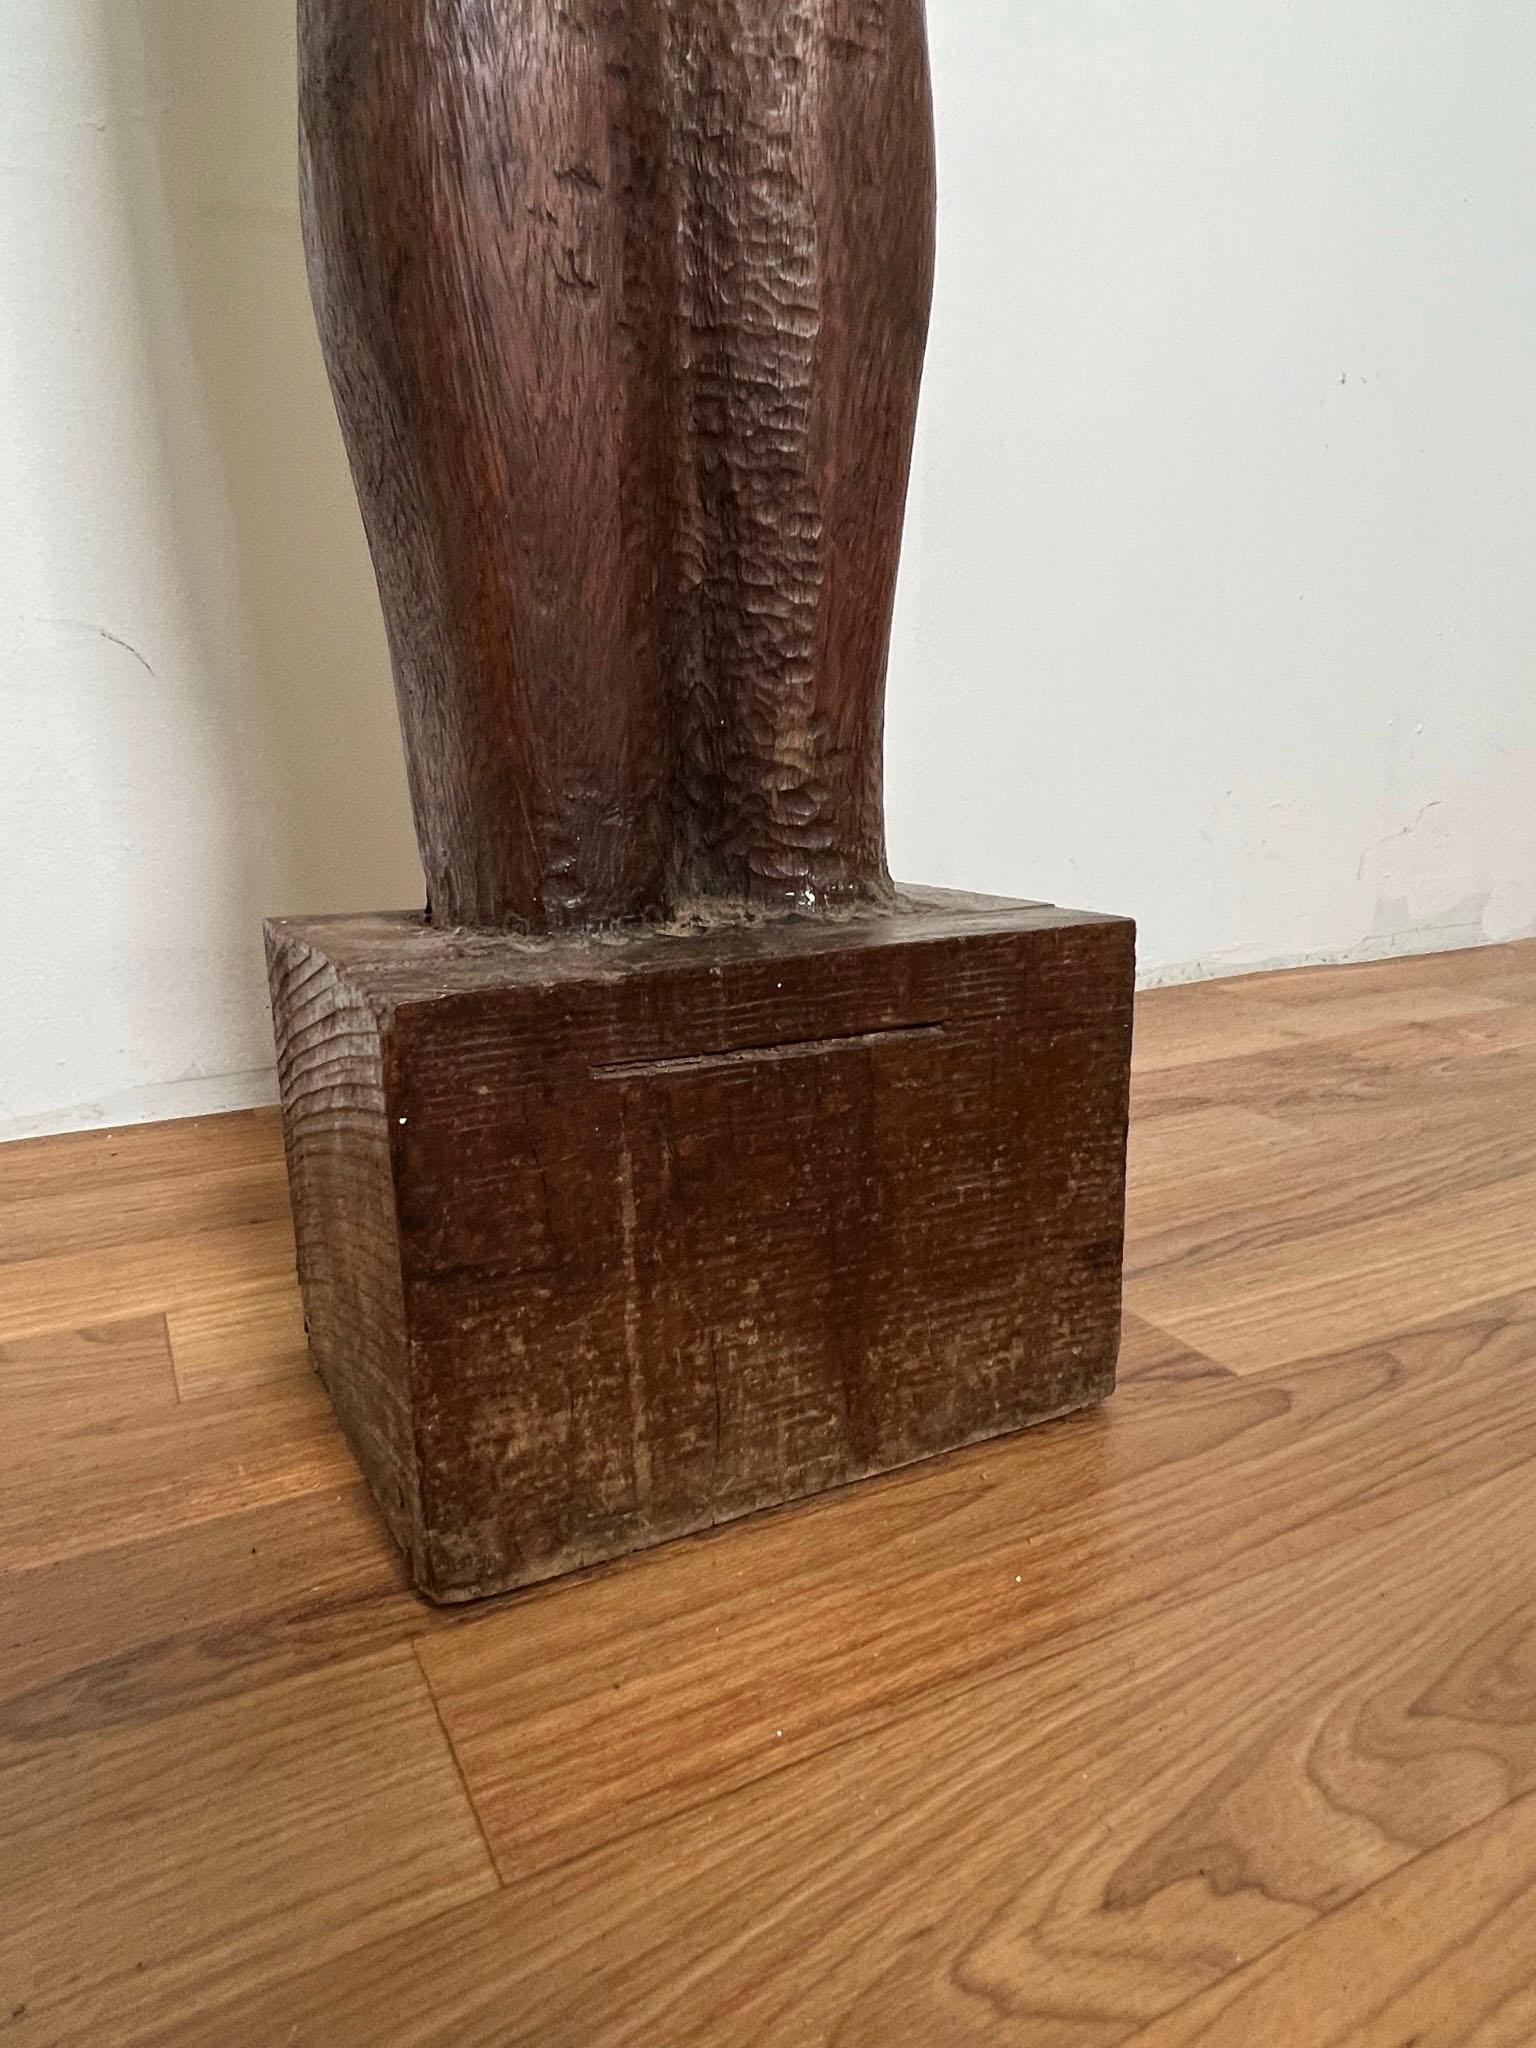 Mahogany Figurative Modernist Nude Carved Wood Totem Sculpture circa 1970s